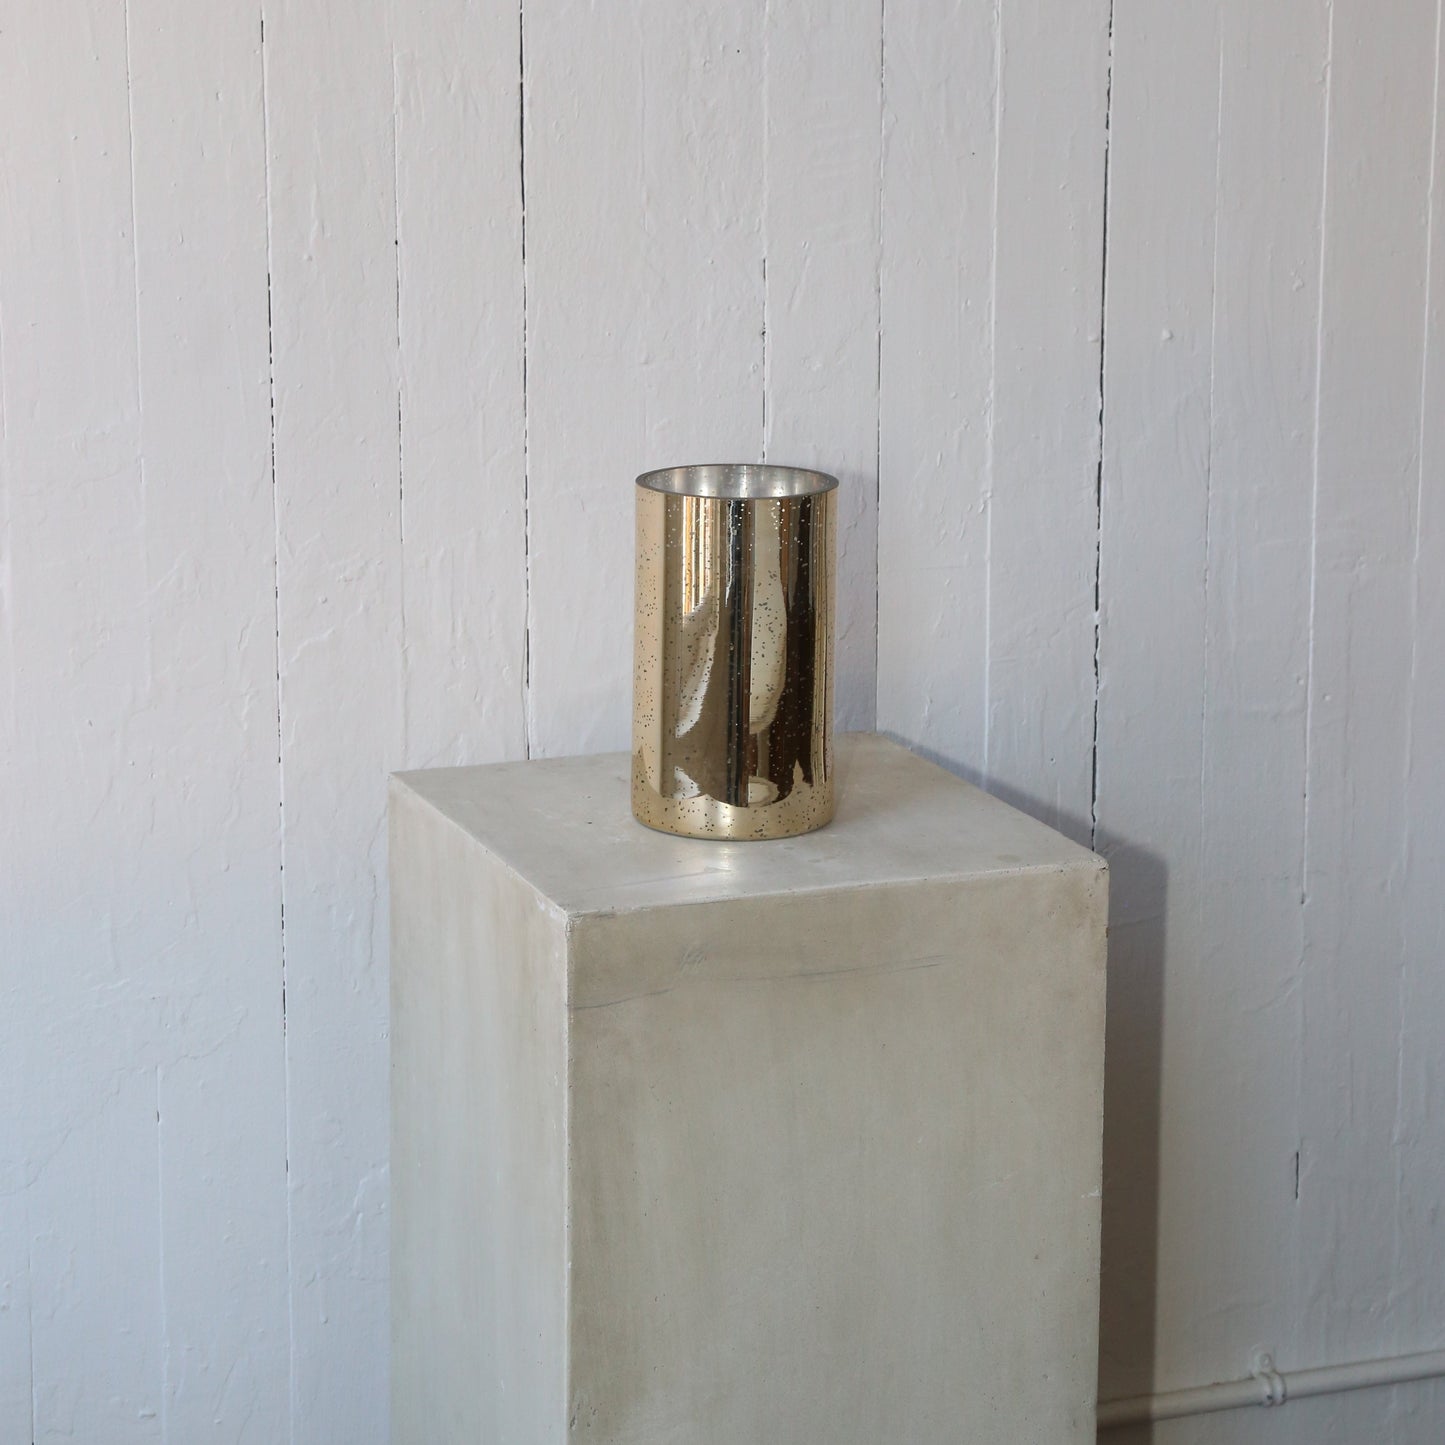 Replica Vase available at Rook & Rose.